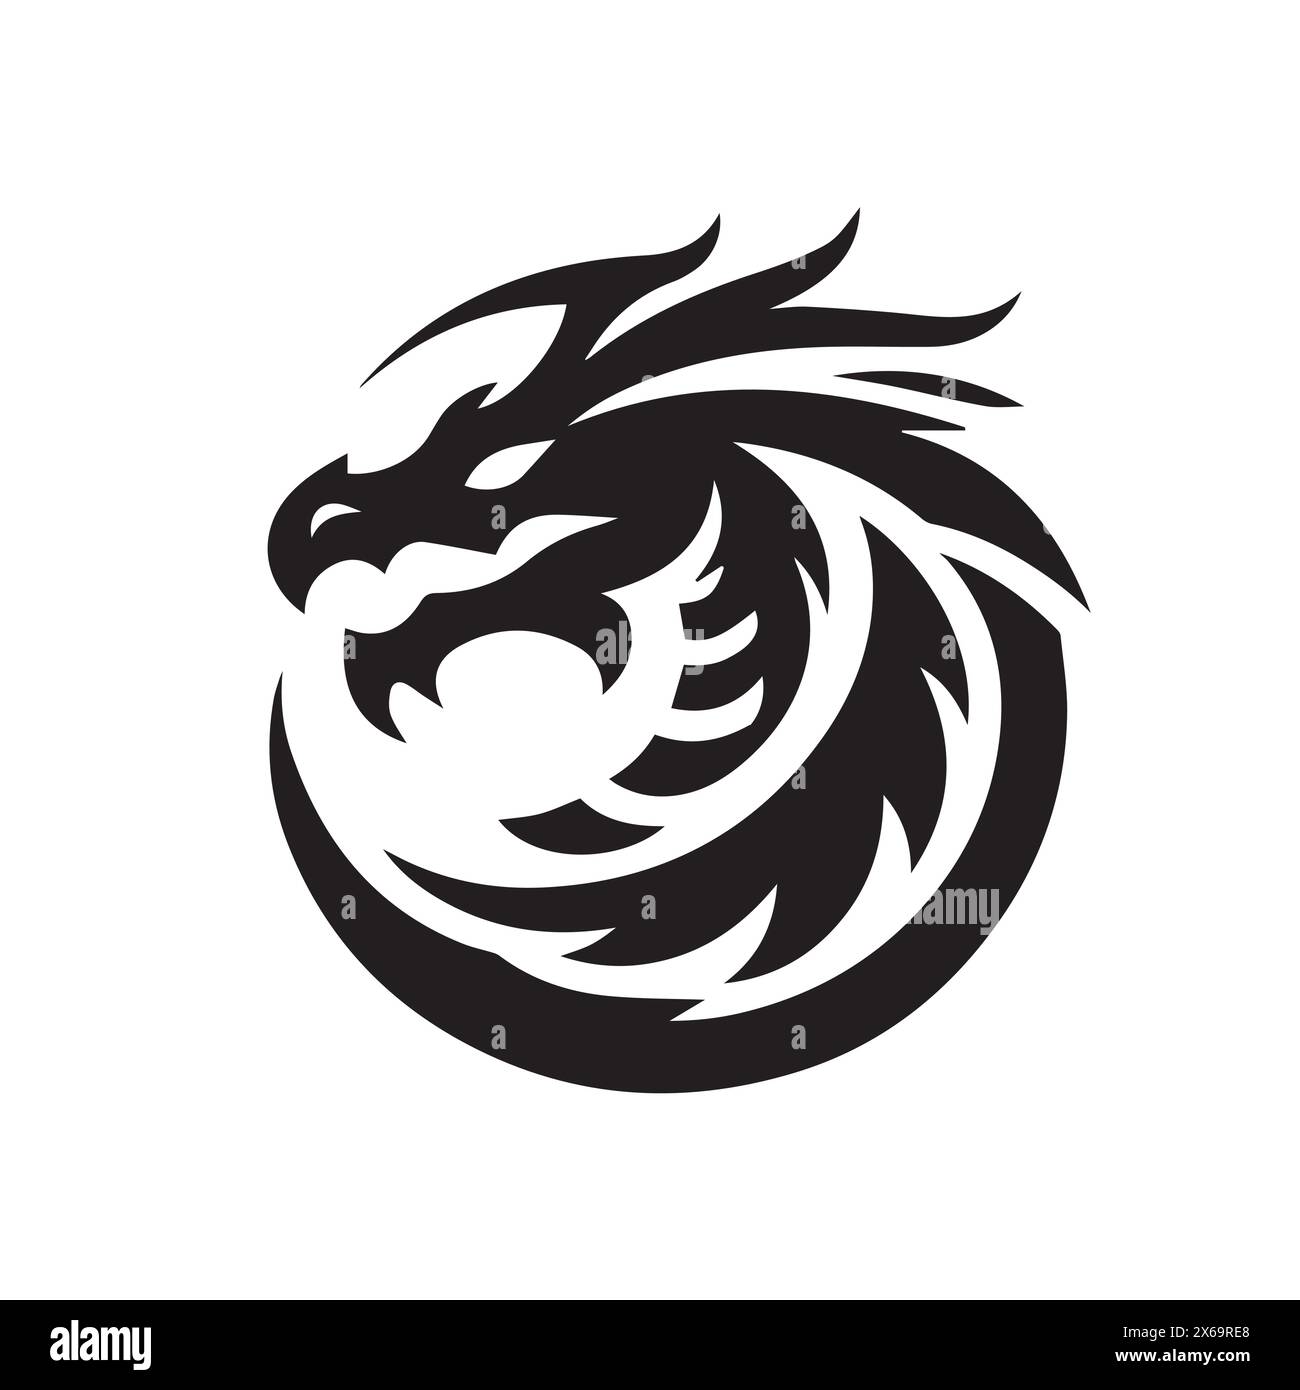 dragon head Illustration hand drawn sketch doodle for tattoo, stickers, logo, Stock Vector